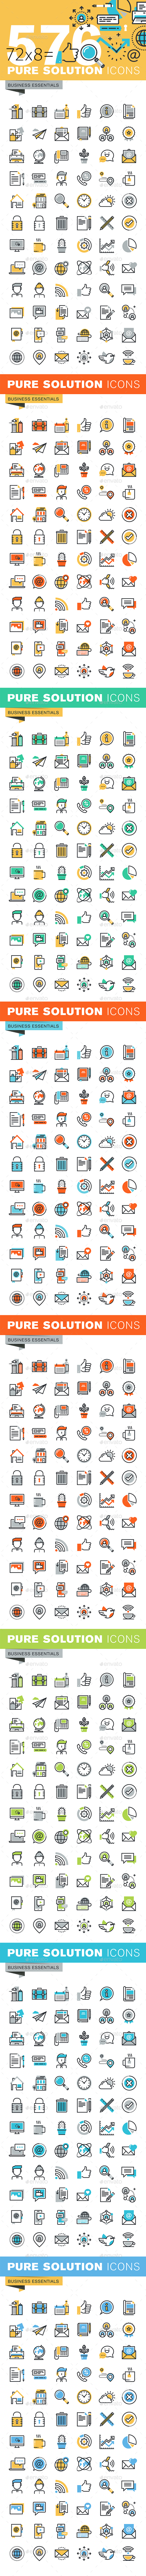 Set of Thin Line Flat Design Icons of Business Essentials